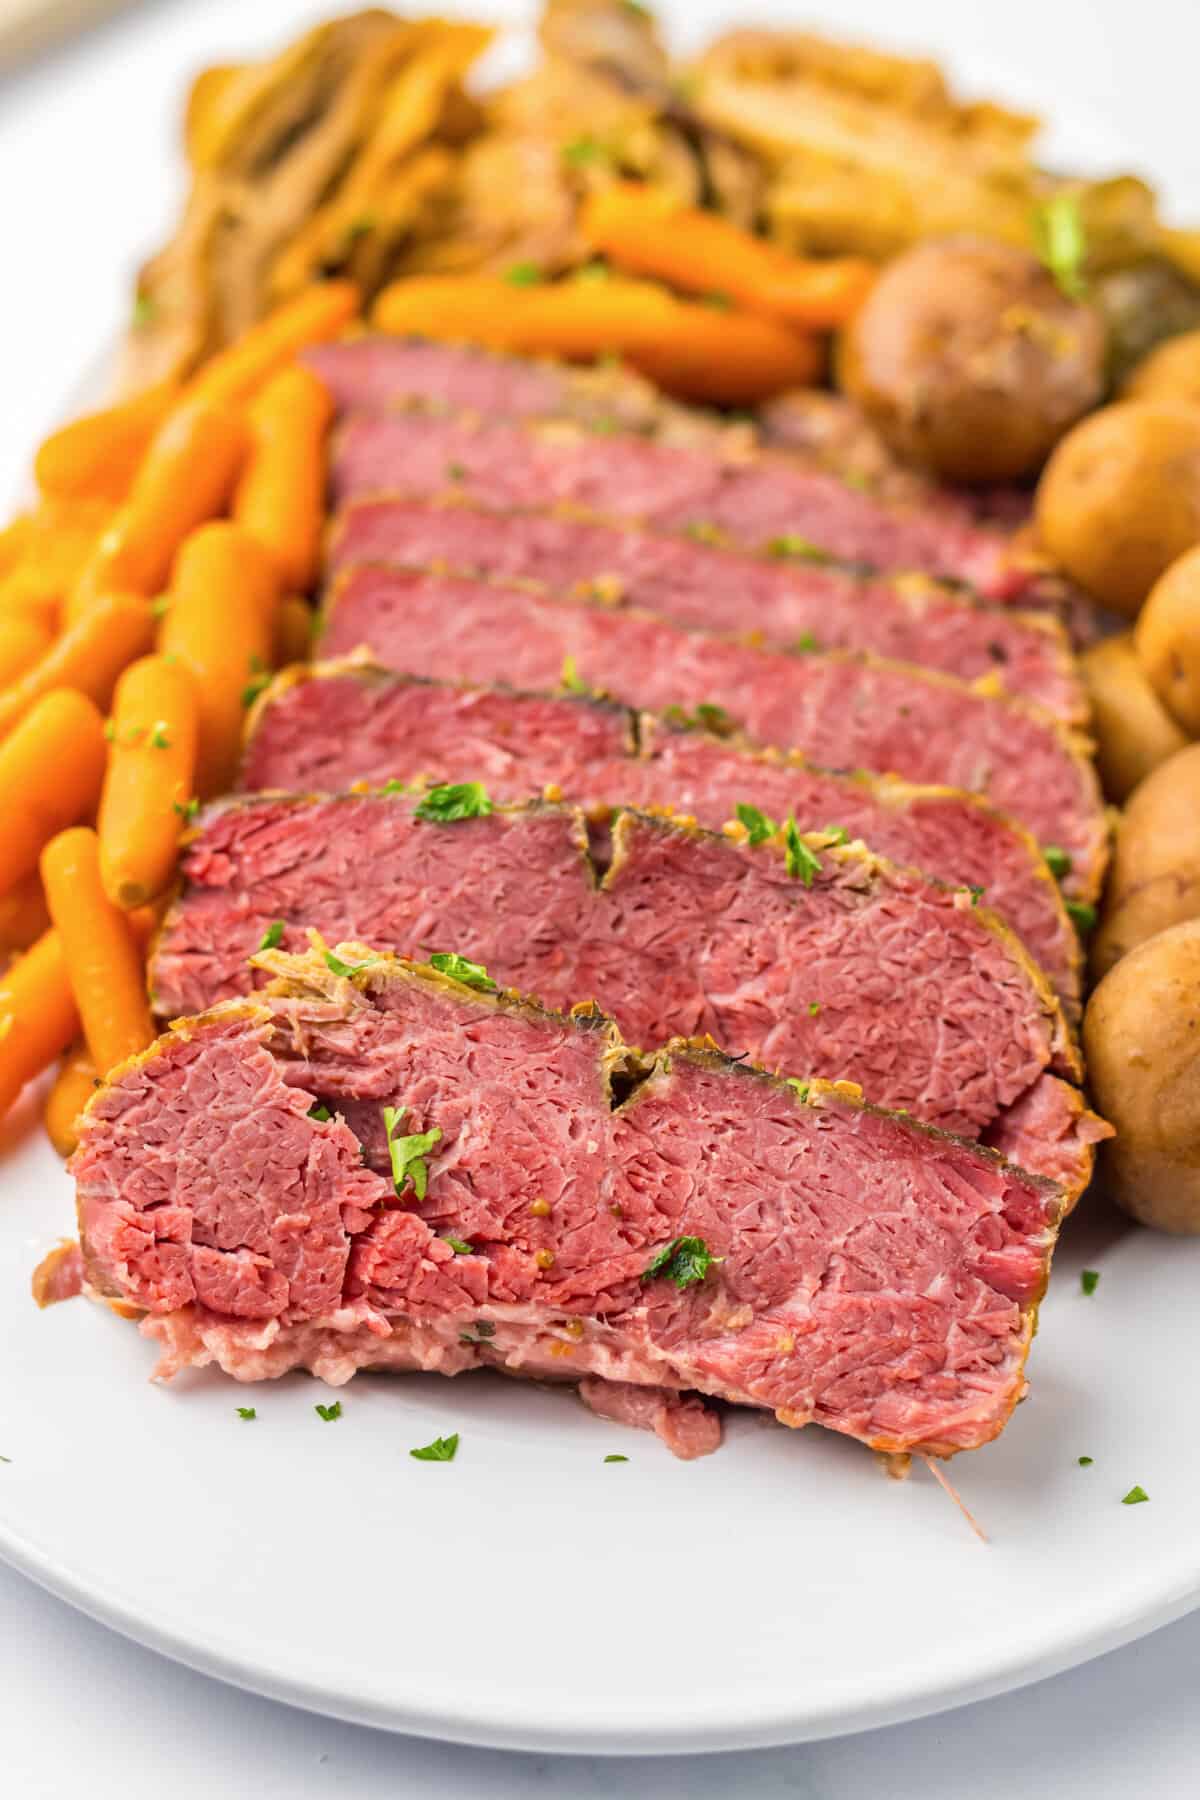 Sliced corned beef with cabbage, carrots and potatoes.